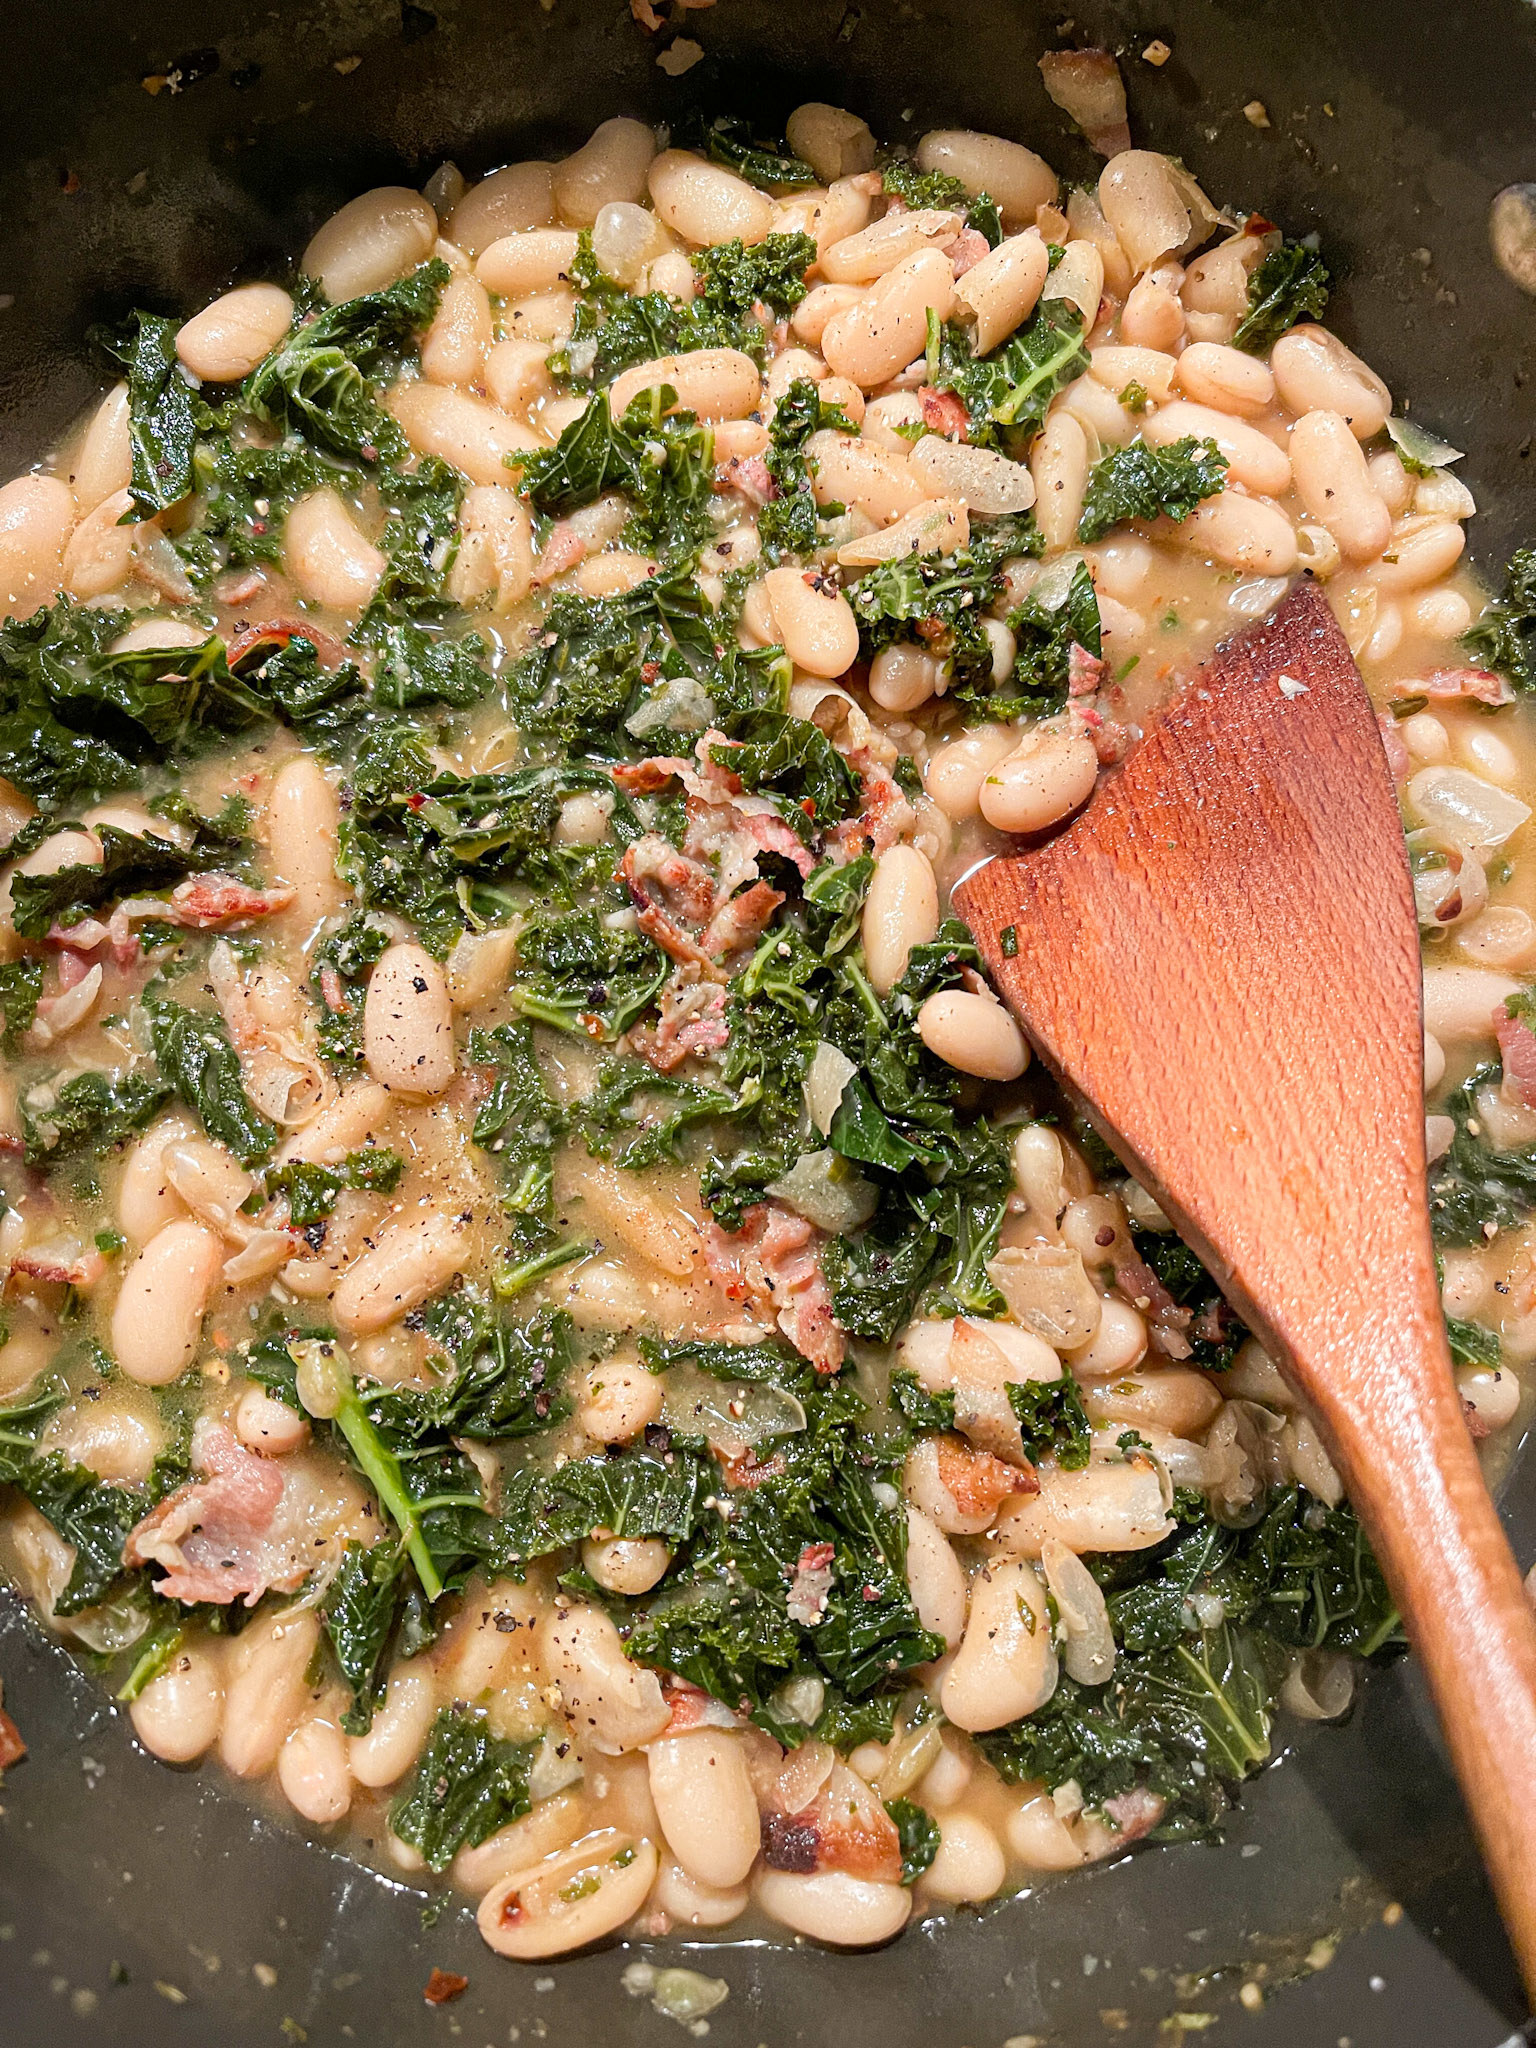 skillet filled with white beans, broth, and plenty of kale